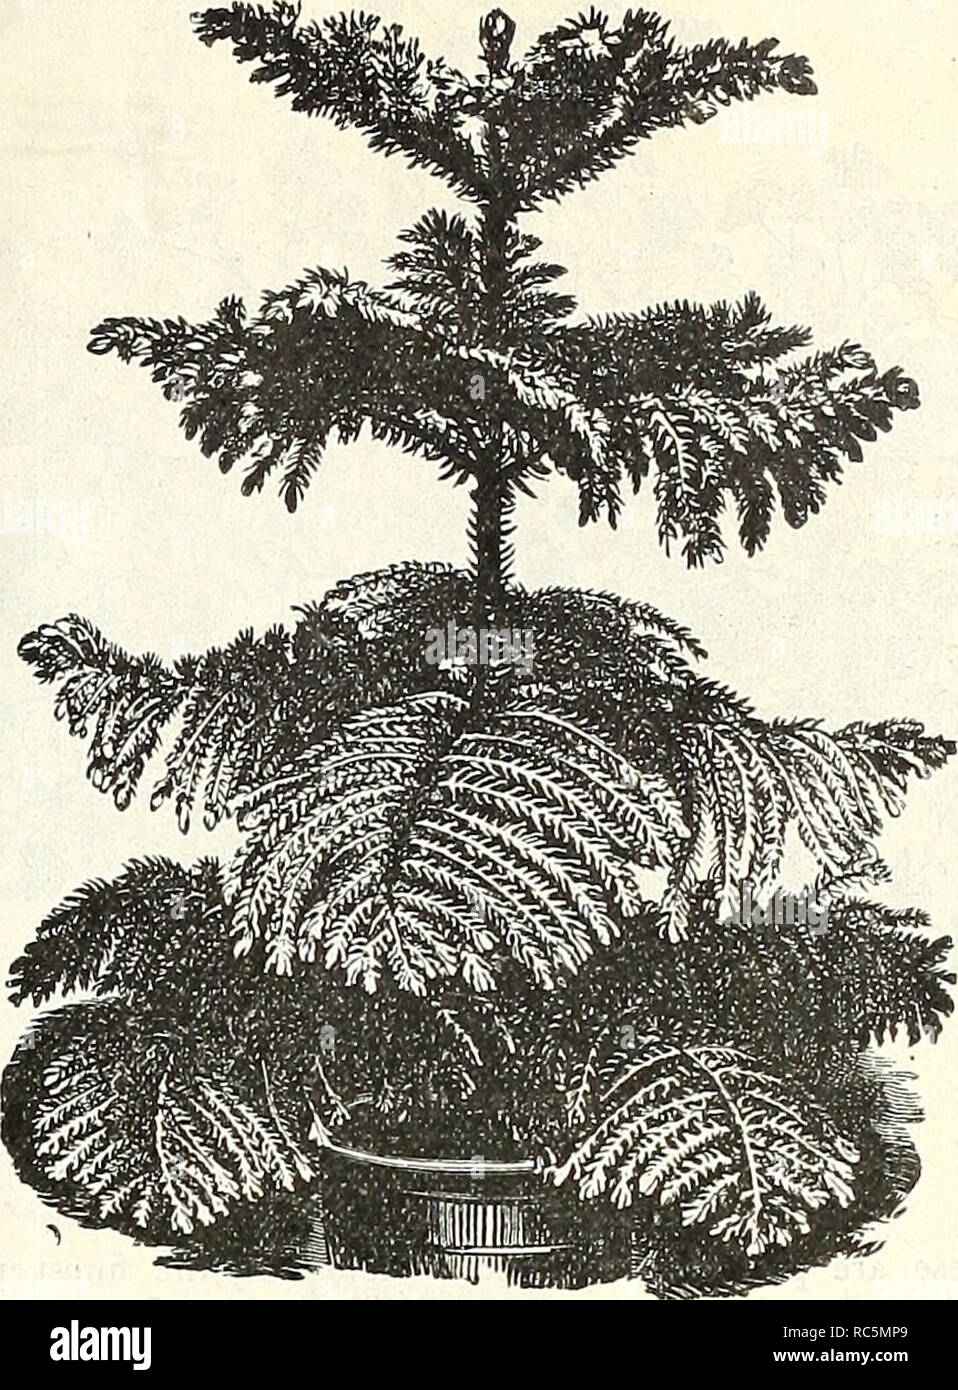 . Dreer's mid-summer catalogue 1905. Flowers Seeds Catalogs; Fruit Seeds Catalogs; Vegetables Seeds Catalogs; Nurseries (Horticulture) Catalogs; Gardening Equipment and supplies Catalogs. ASPARAGUS PLUMOSUS COMPACTUS ARAUCARIA KXCEI.SA Ardisia Crennlata. A very ornamental greenhouse plant, with dark evergreen foliage, producing clusters of brilliant red berries ; 25 els. and 50 cts. each. Aspidistra. Lurida. A very useful and durable decorative plant of strong growth ; will succeed in any position ; an excellent hall or corridor plant. 50 cts., 75 cts. and ^l.oo each. ^^ Lurida Variegata. A pr Stock Photo